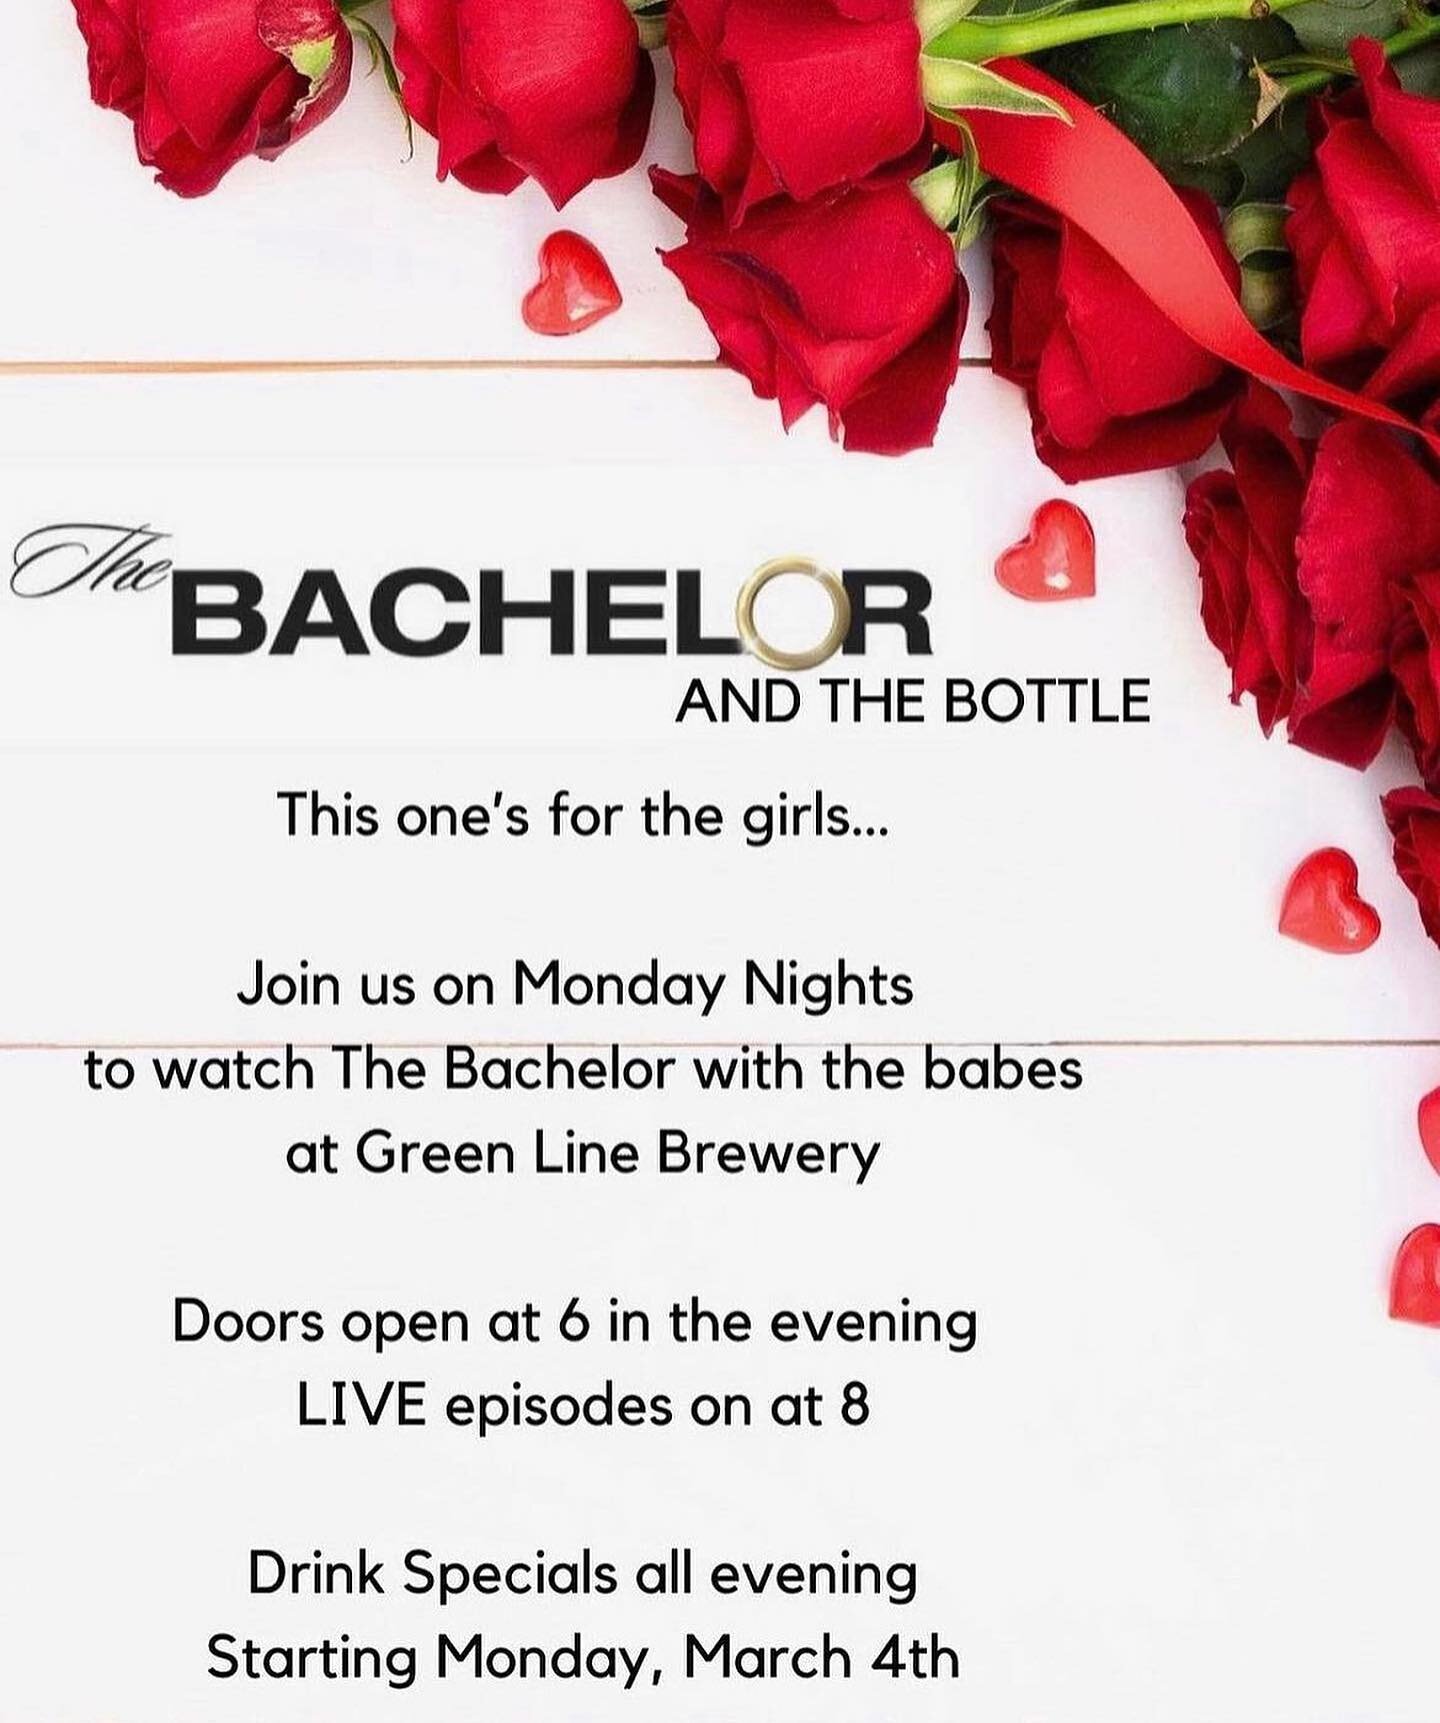 Who&rsquo;s ready for the FINALE tonight of The Bachelor?! Join us for &ldquo;The Bachelor and The Bottle&rdquo; at #GreenLineBrewery ! Hang out with us to see who Joey picks to be his bride!💍🌹🥂 Doors open at 6 &amp; the show starts at 8! Wine spe